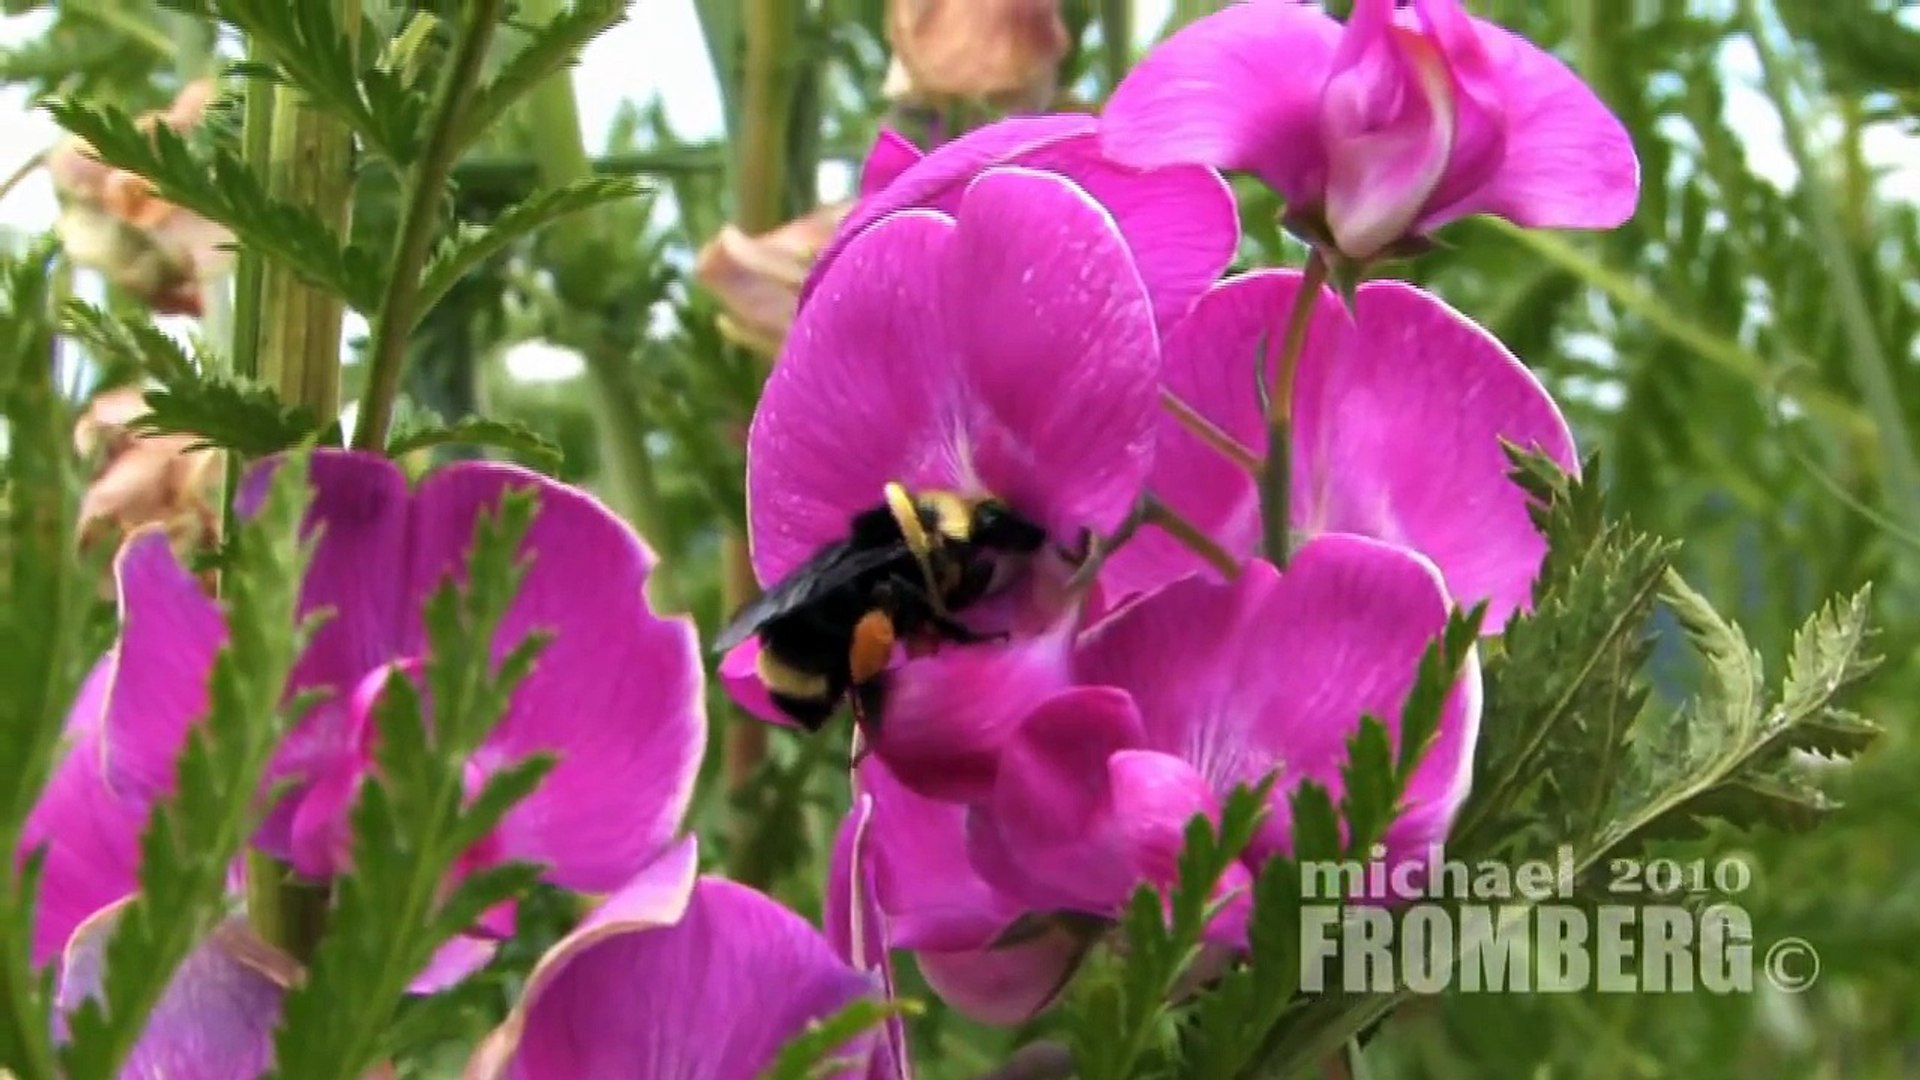 Canadian Bumble Bee & Wild Sweet Pea Flowers - Michael Fromberg